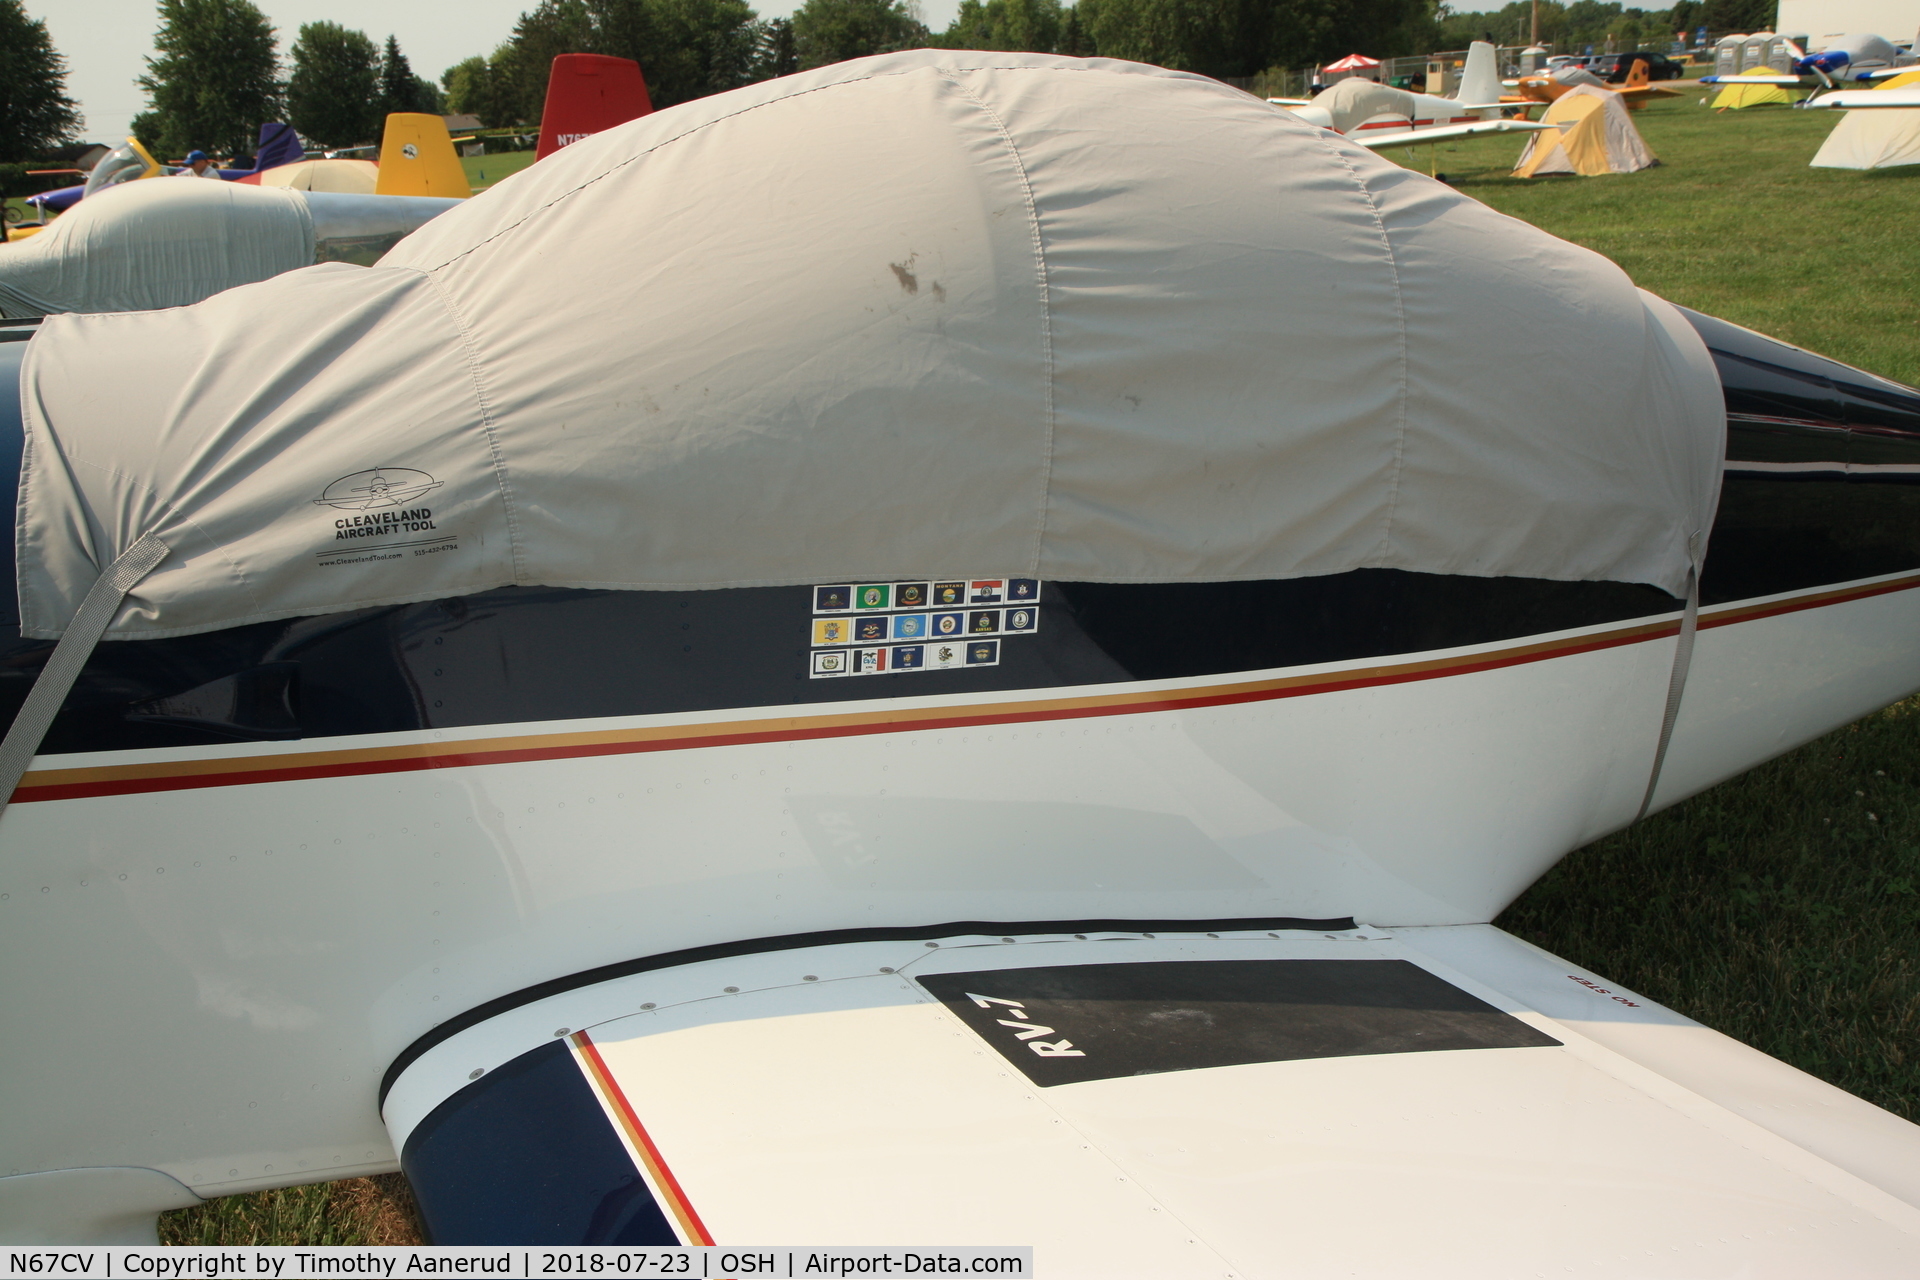 N67CV, 2003 Vans RV-7 C/N 70335, 2003 Vans RV-7, c/n: 70335, collecting U.S. State Flags